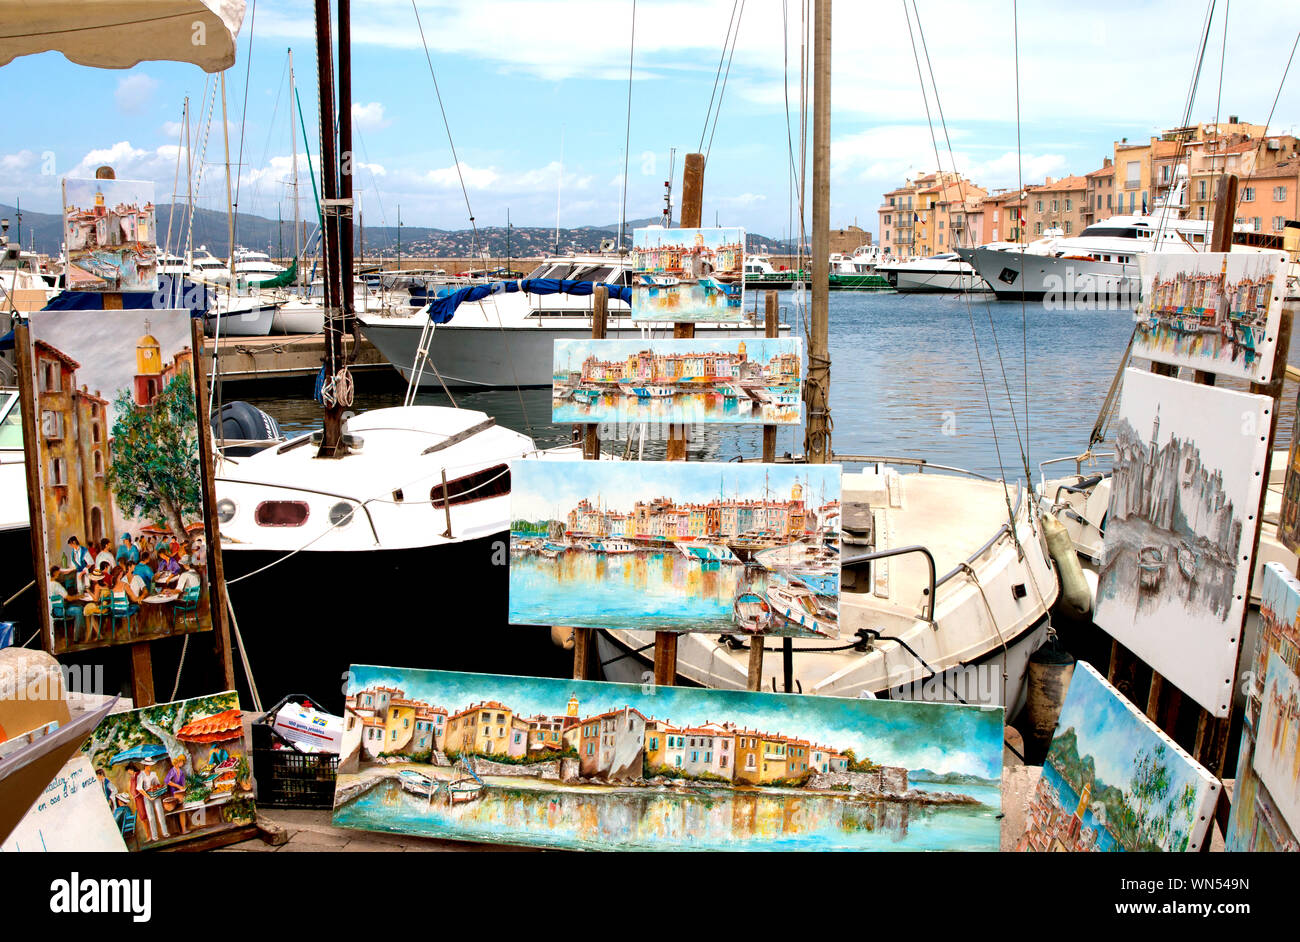 Artist and paintings abound on the foreshore in St Tropez, France Stock Photo